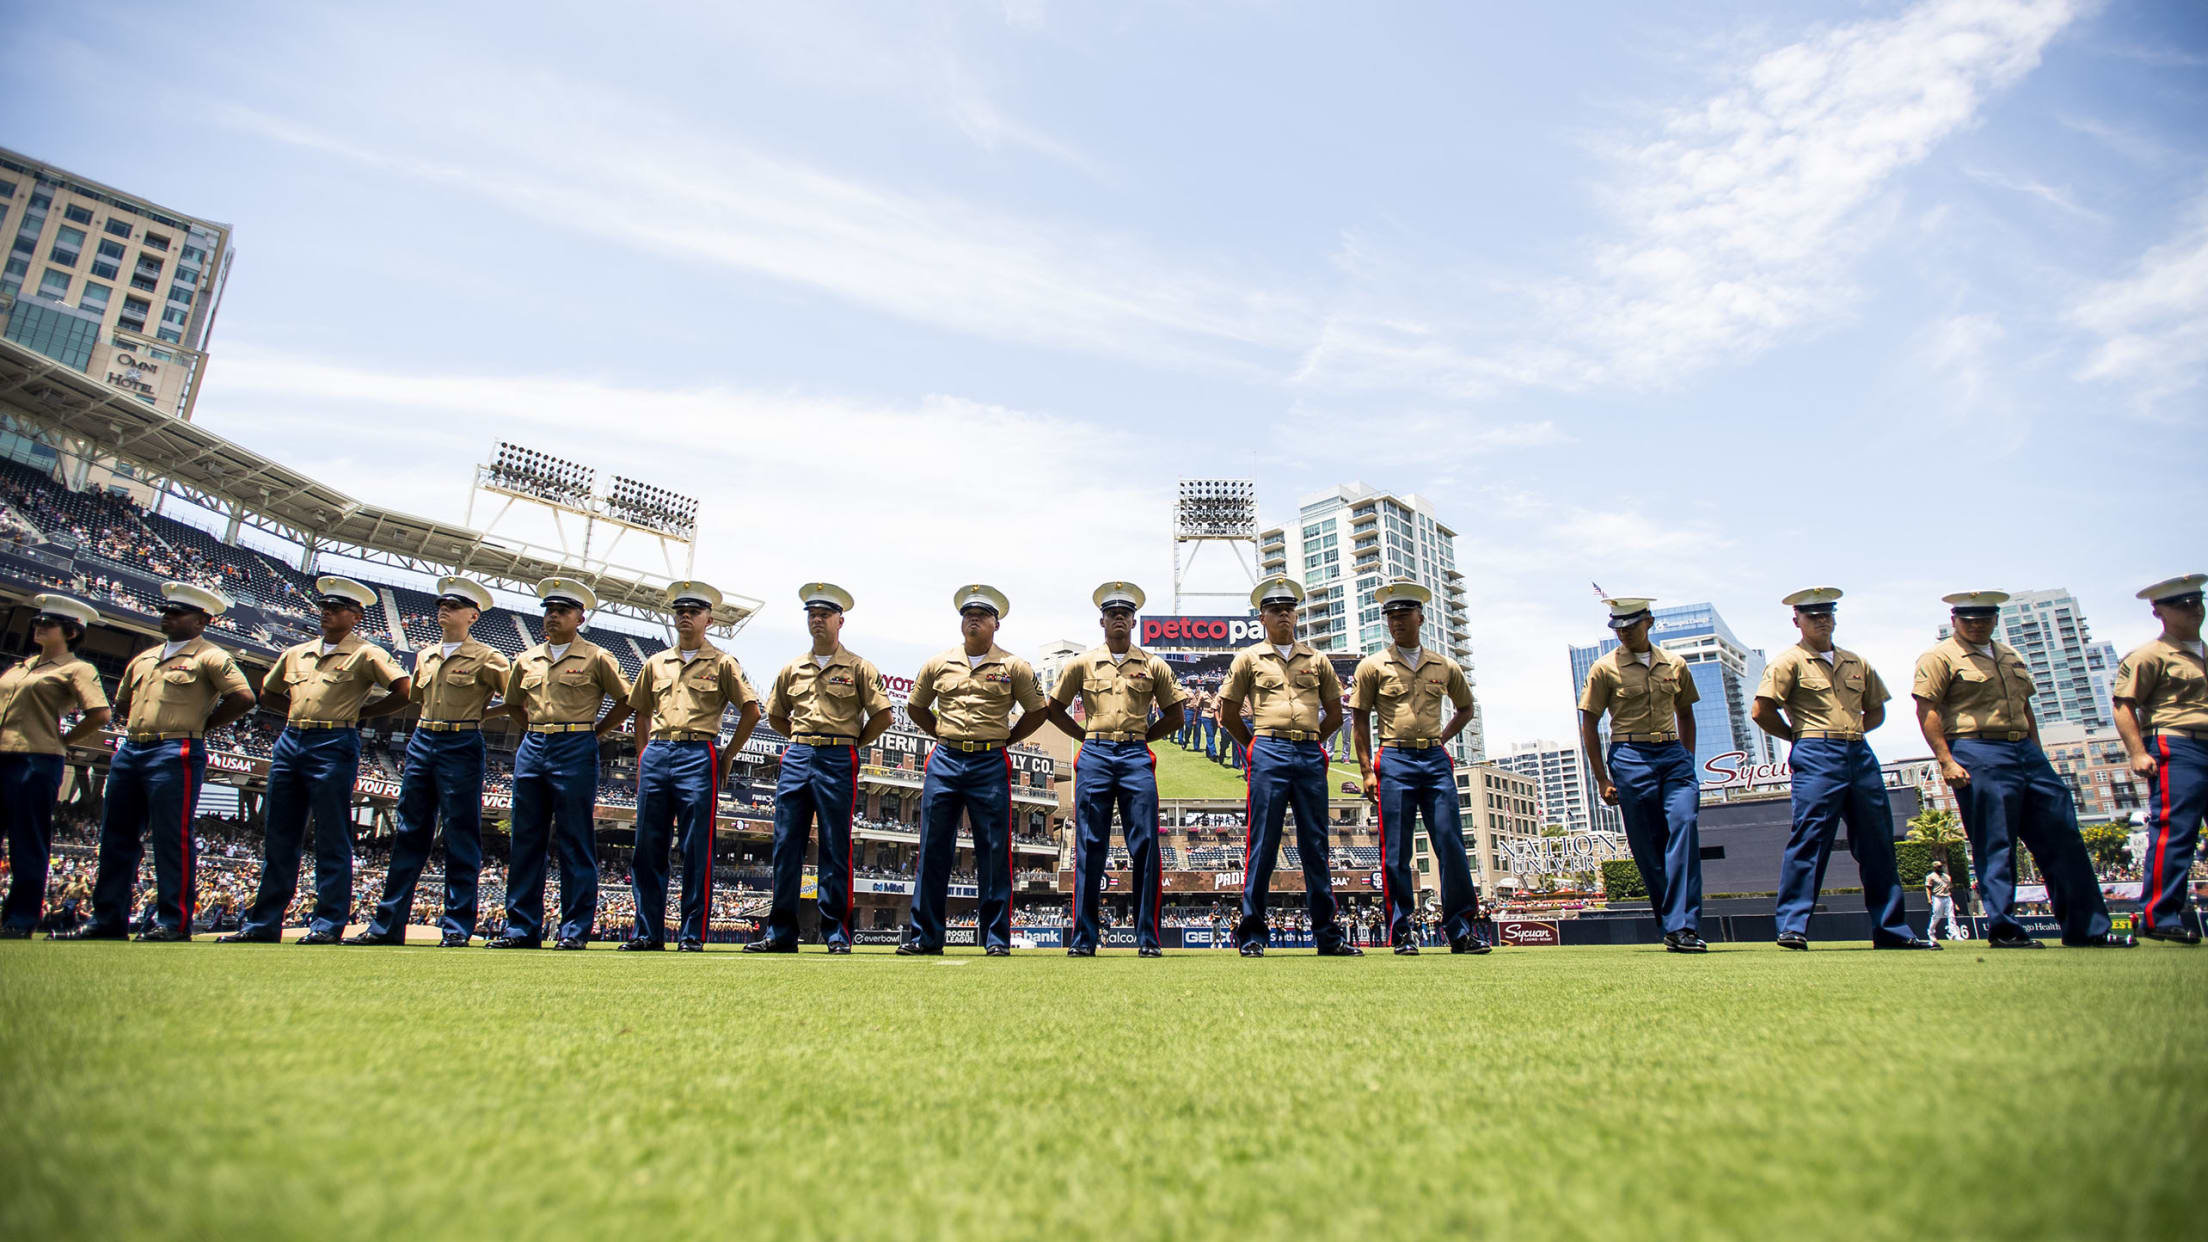 Padres Community, Military, Moments